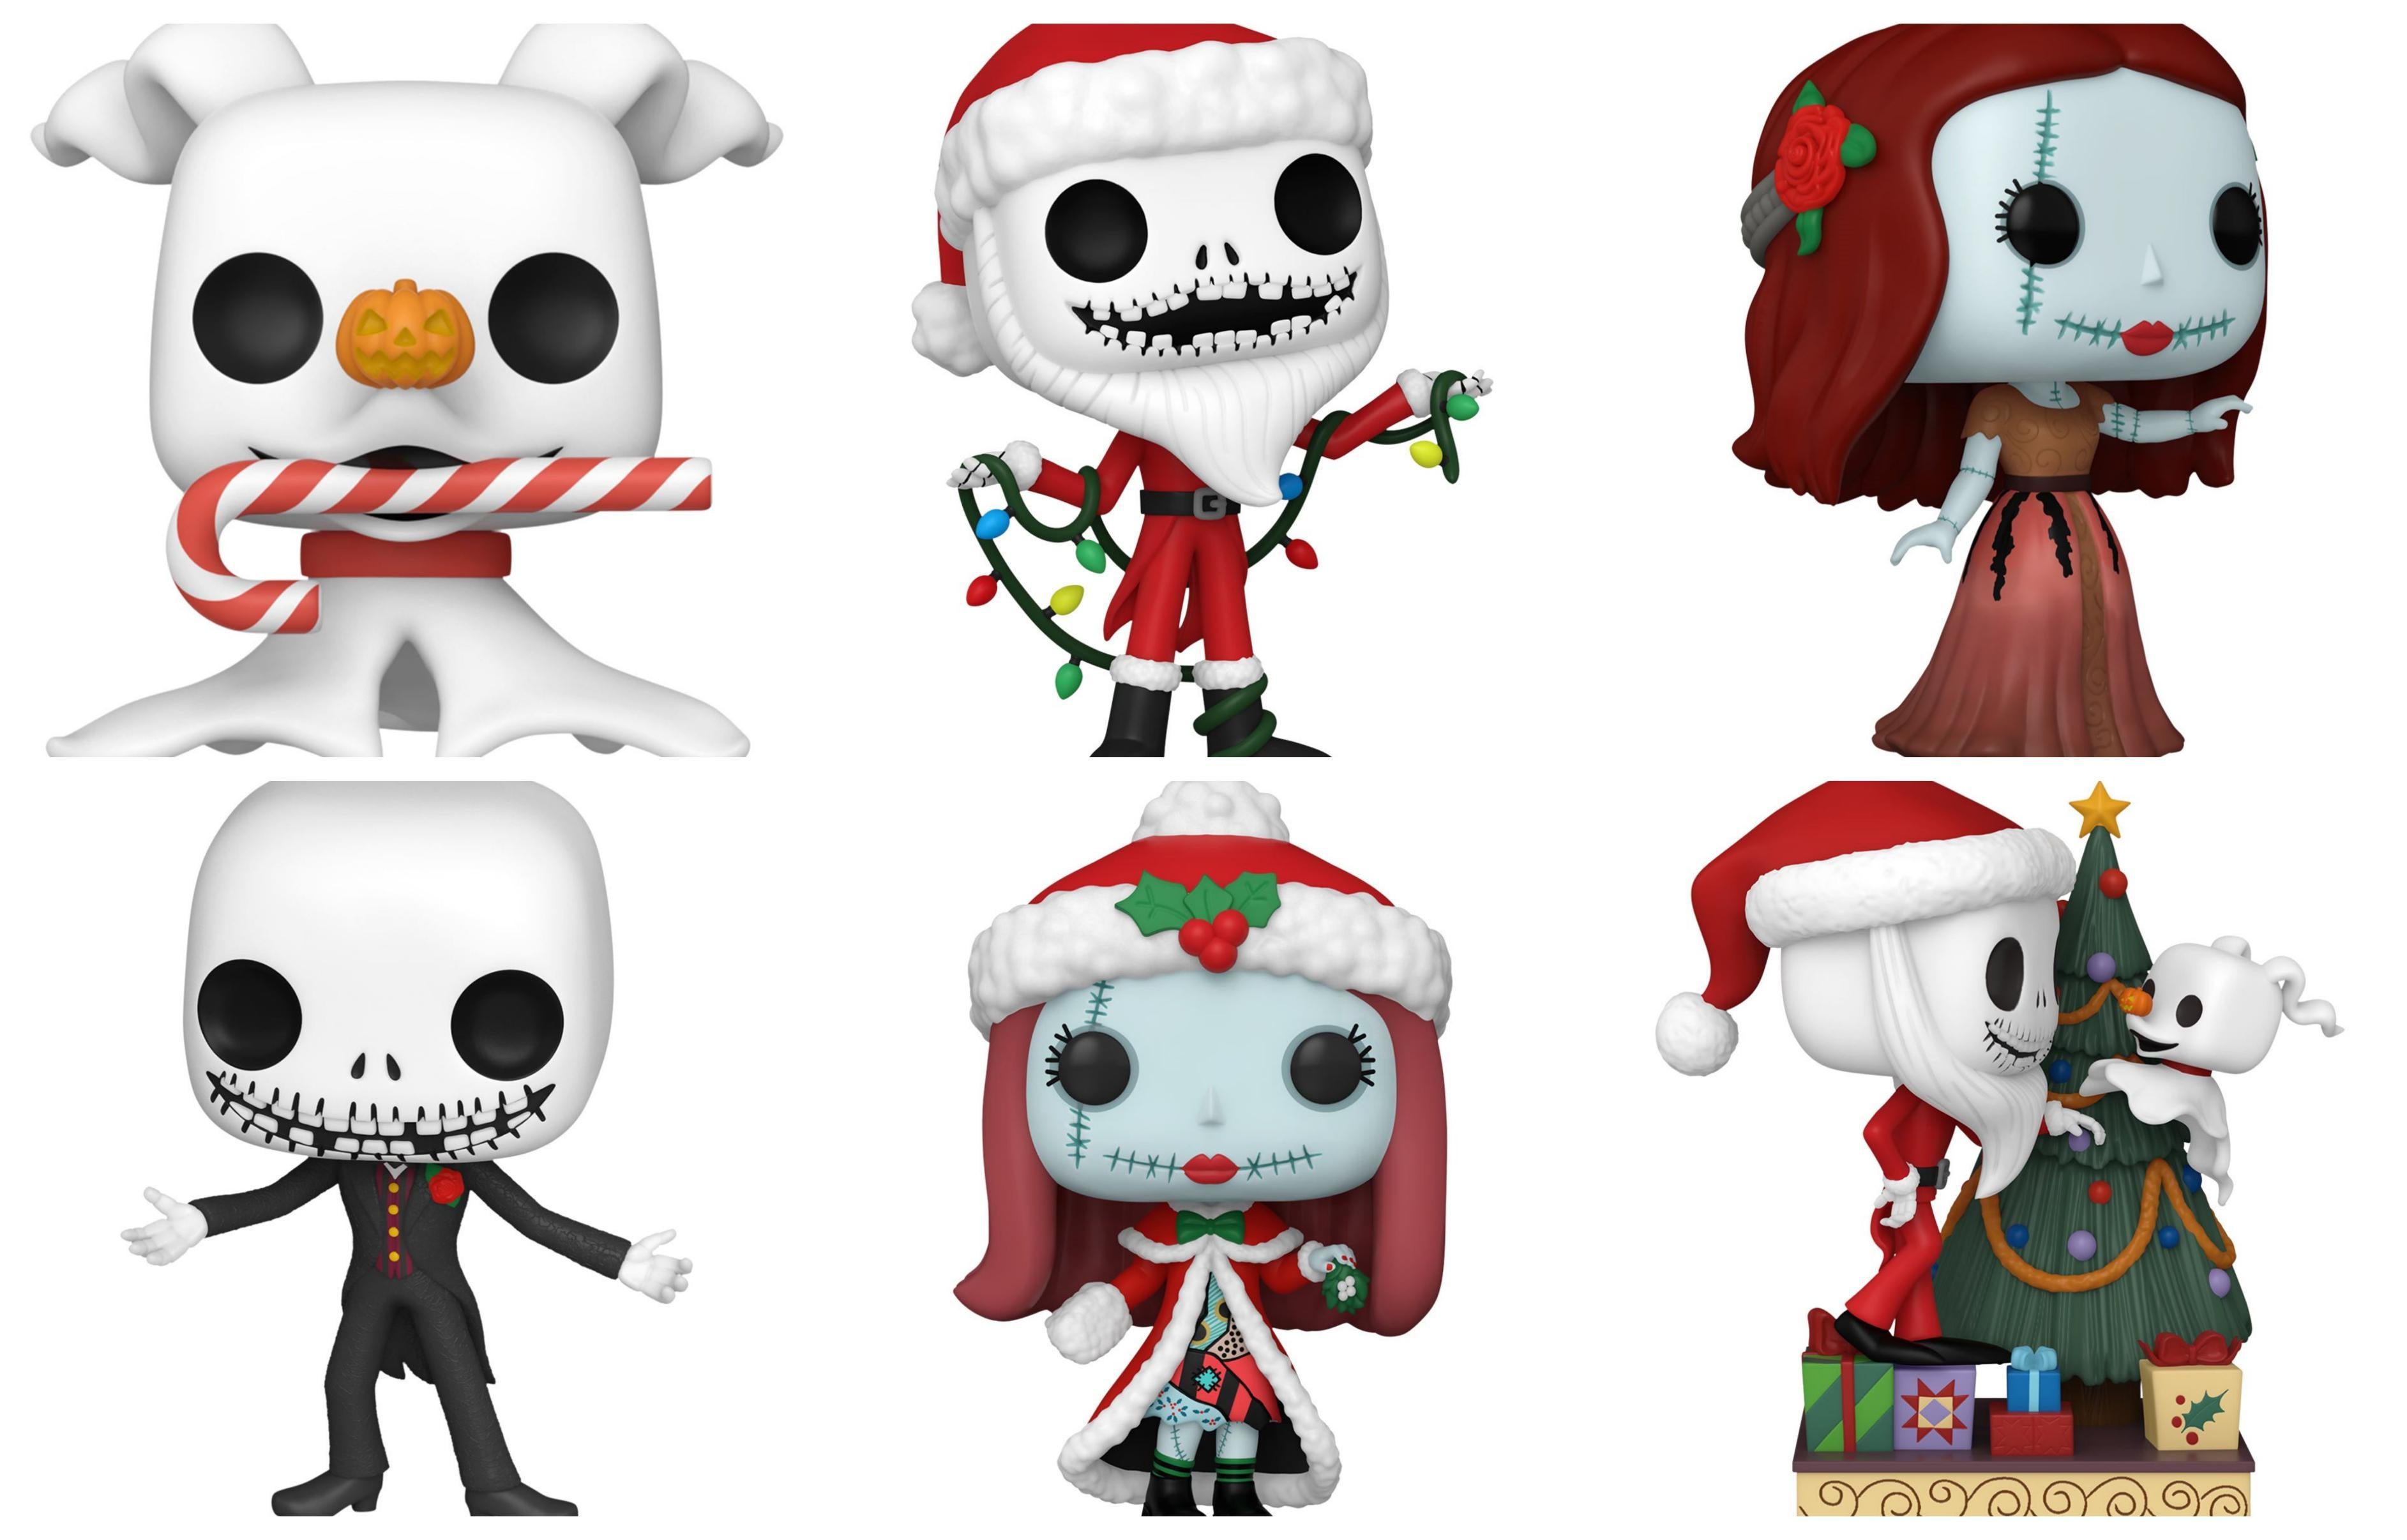 Nightmare Before Christmas 30th Anniversary Funko Pops Wave 2 Adds a